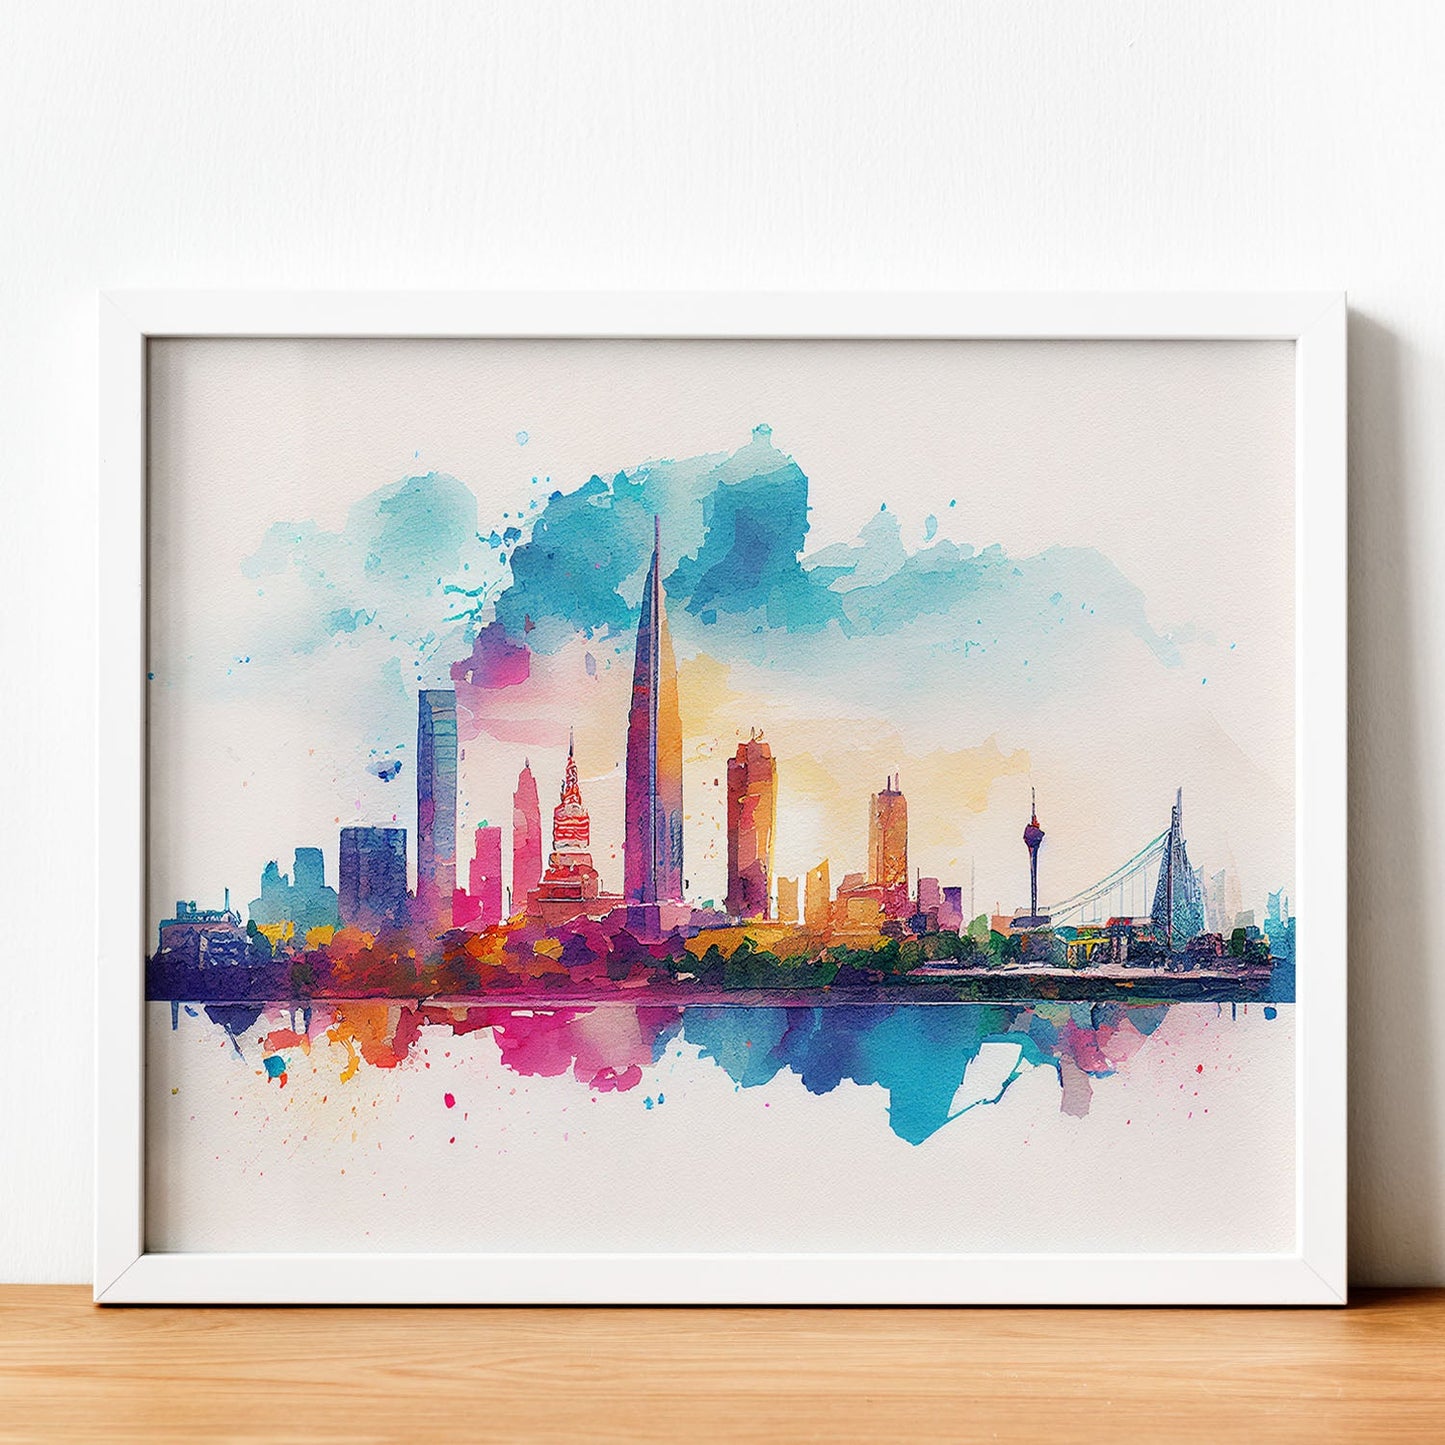 Nacnic watercolor of a skyline of the city of Ho Chi Minh City. Aesthetic Wall Art Prints for Bedroom or Living Room Design.-Artwork-Nacnic-A4-Sin Marco-Nacnic Estudio SL